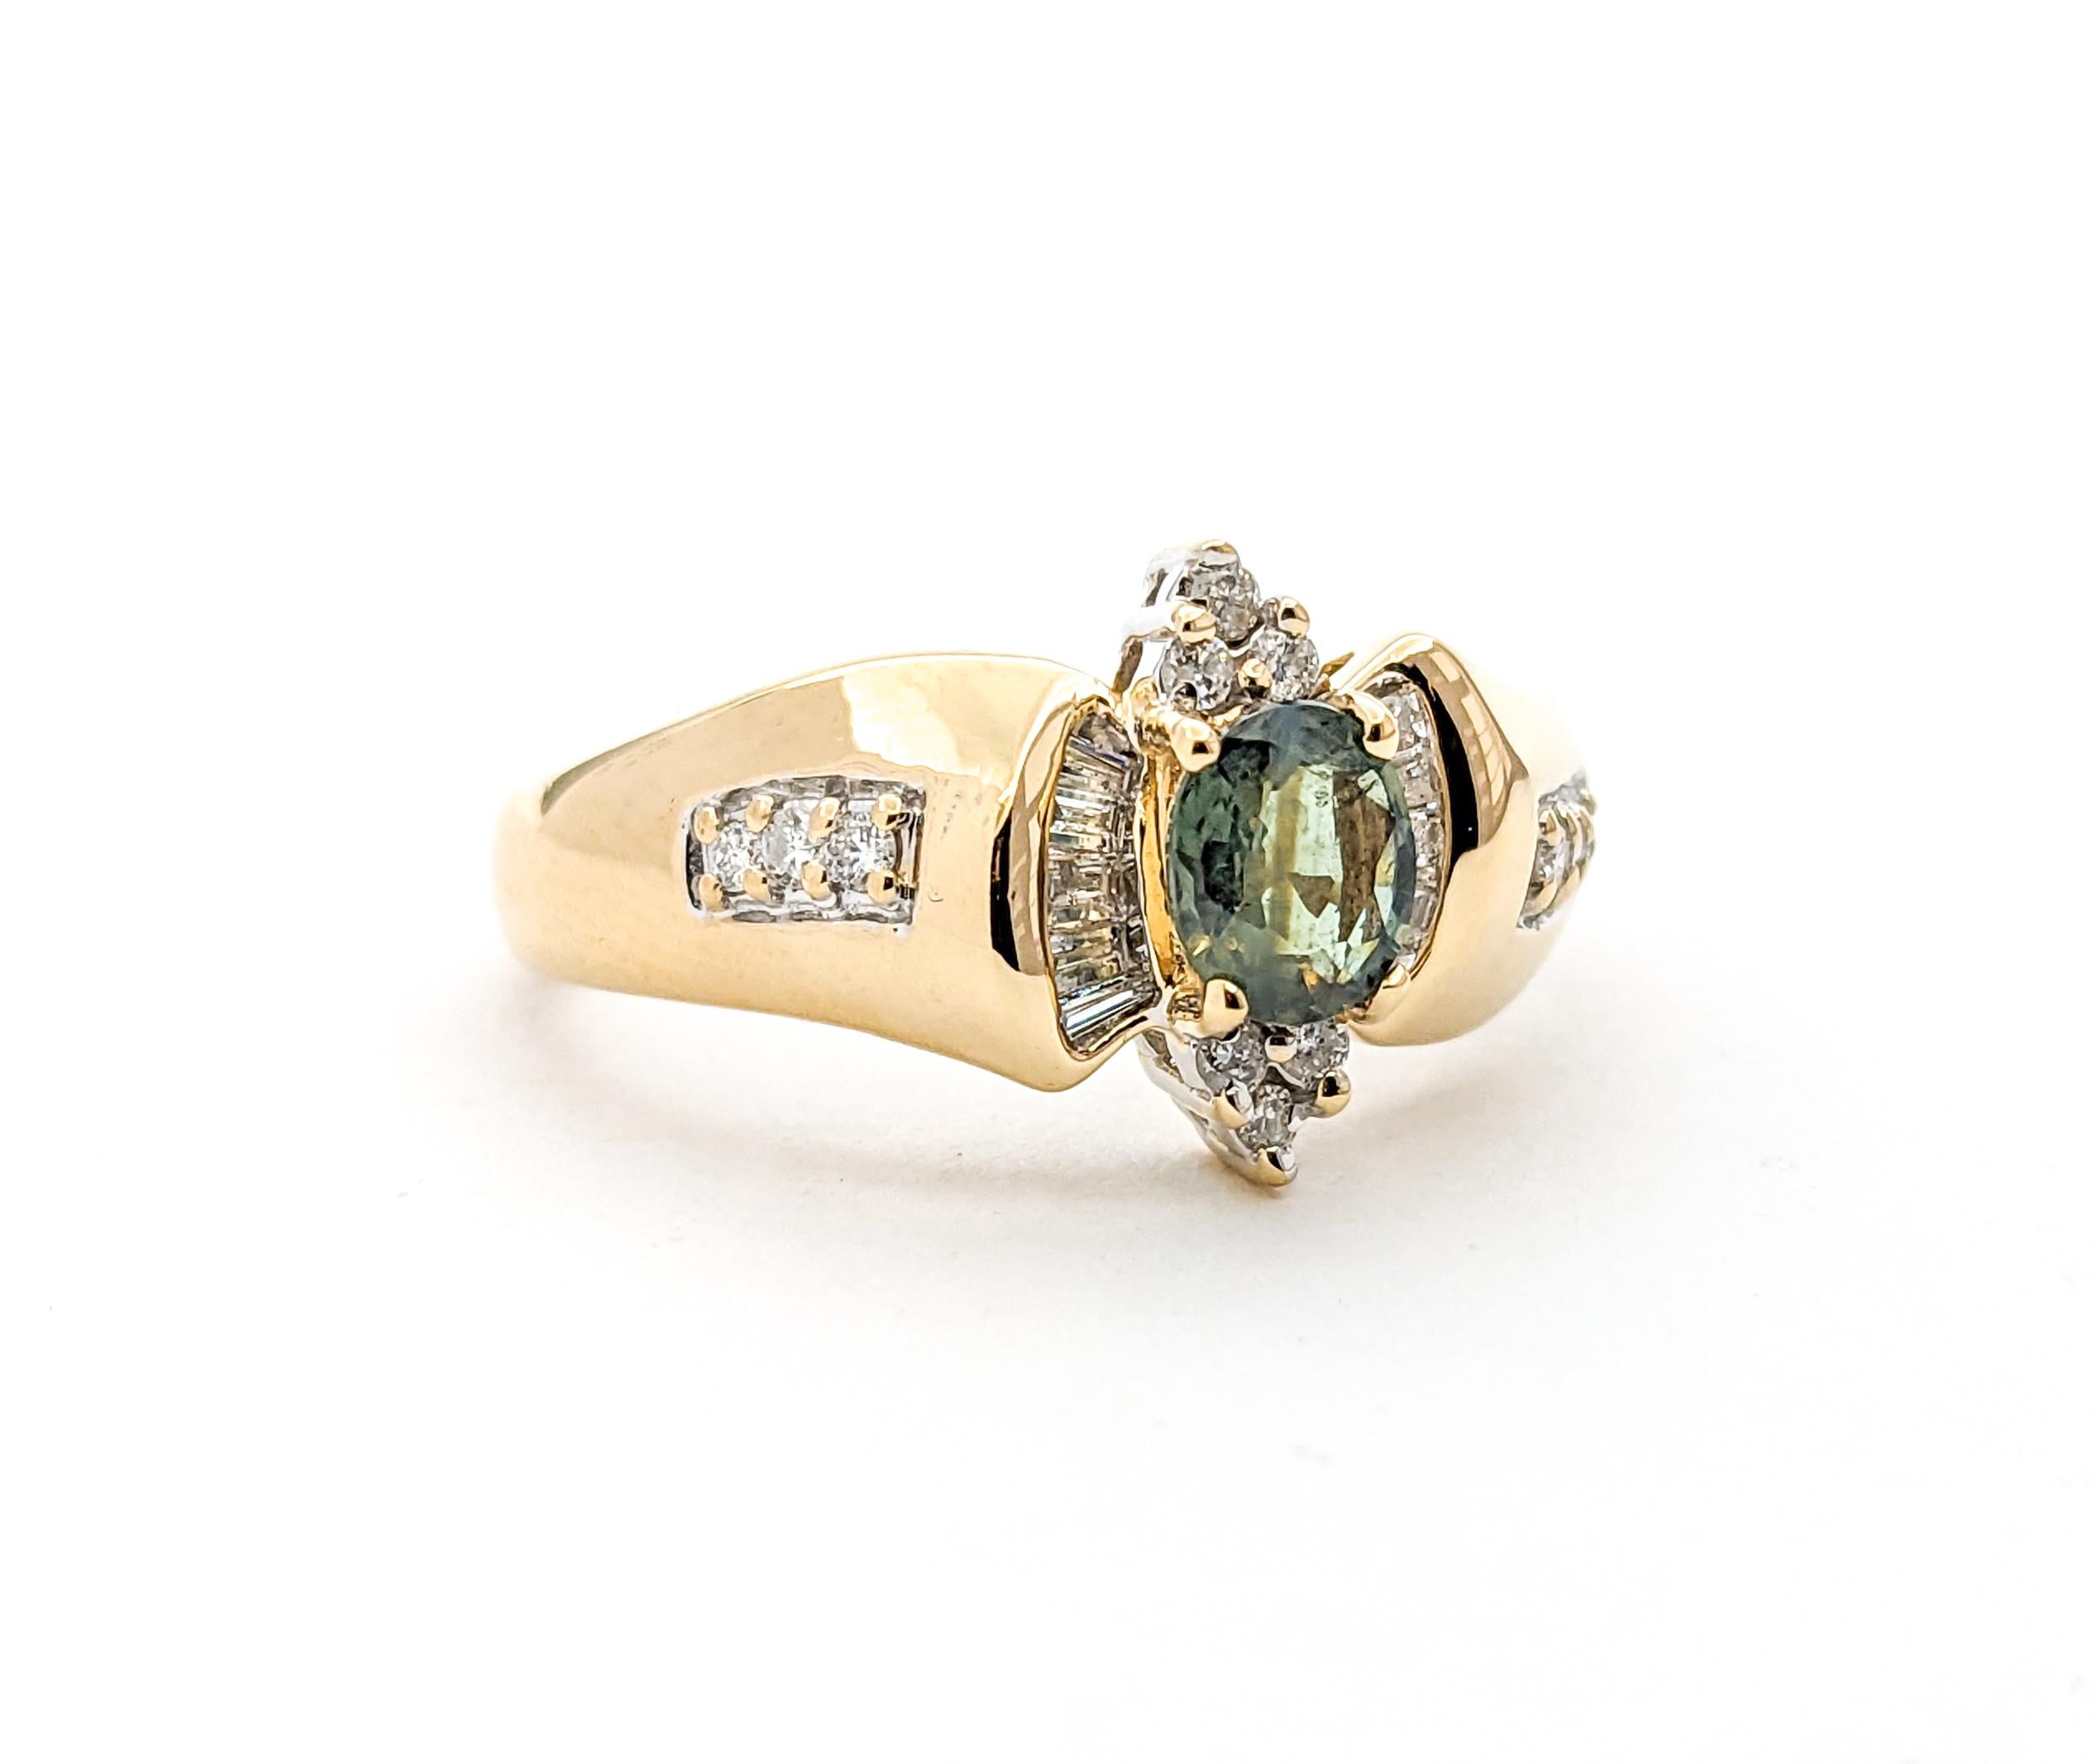 Natural Color Change Alexandrite & baguette Diamond Ring In Yellow Gold

Introducing this fantastic Alexandrite ring in 14k Yellow Gold. At the heart of this creation lies a captivating and rare .49ct natural color change Marquise Alexandrite,